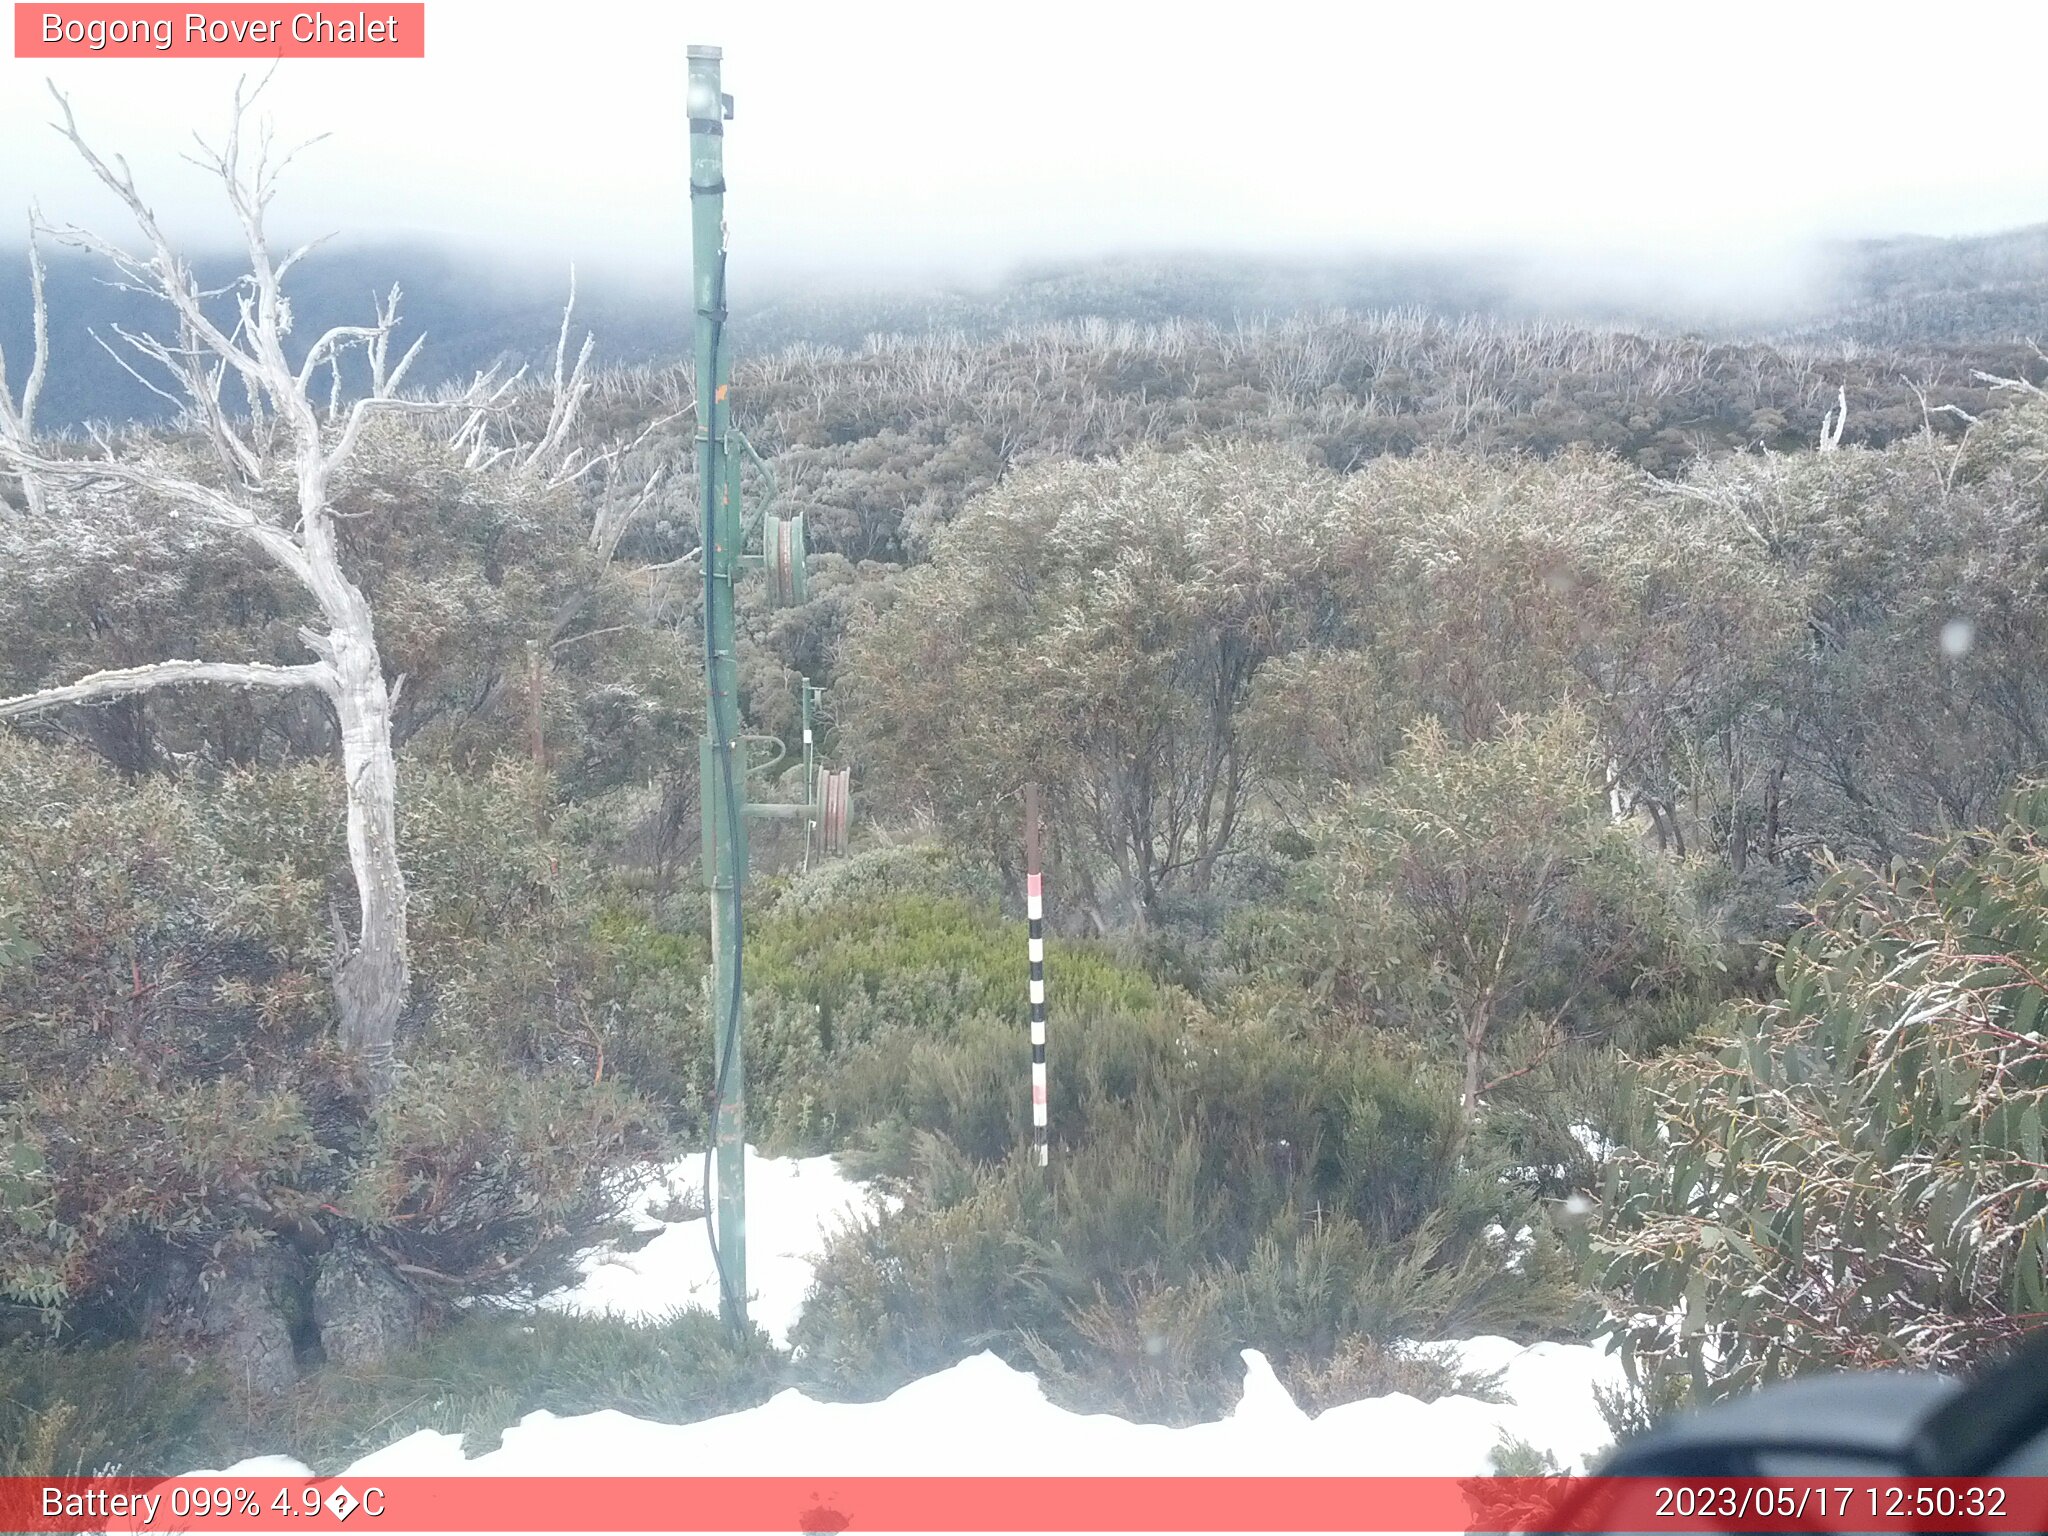 Bogong Web Cam 12:50pm Wednesday 17th of May 2023